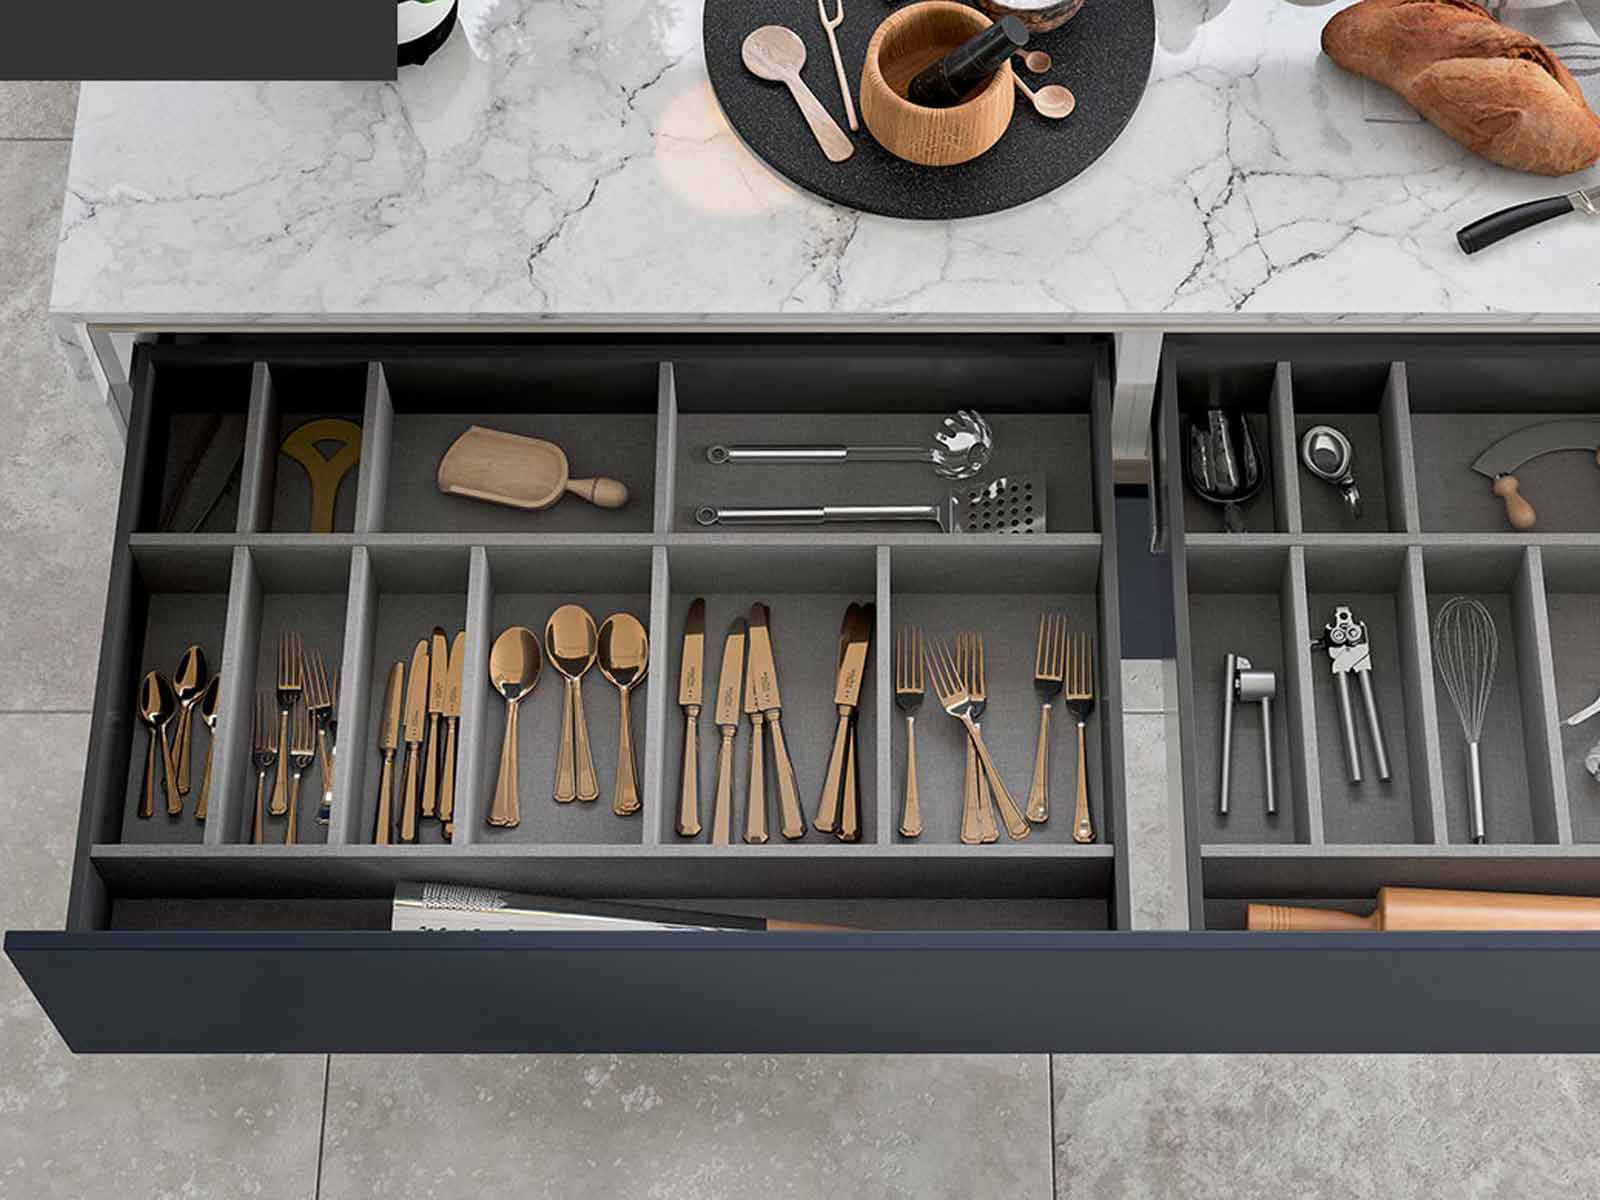 Clean, organised kitchen drawers without plastic and wire inserts